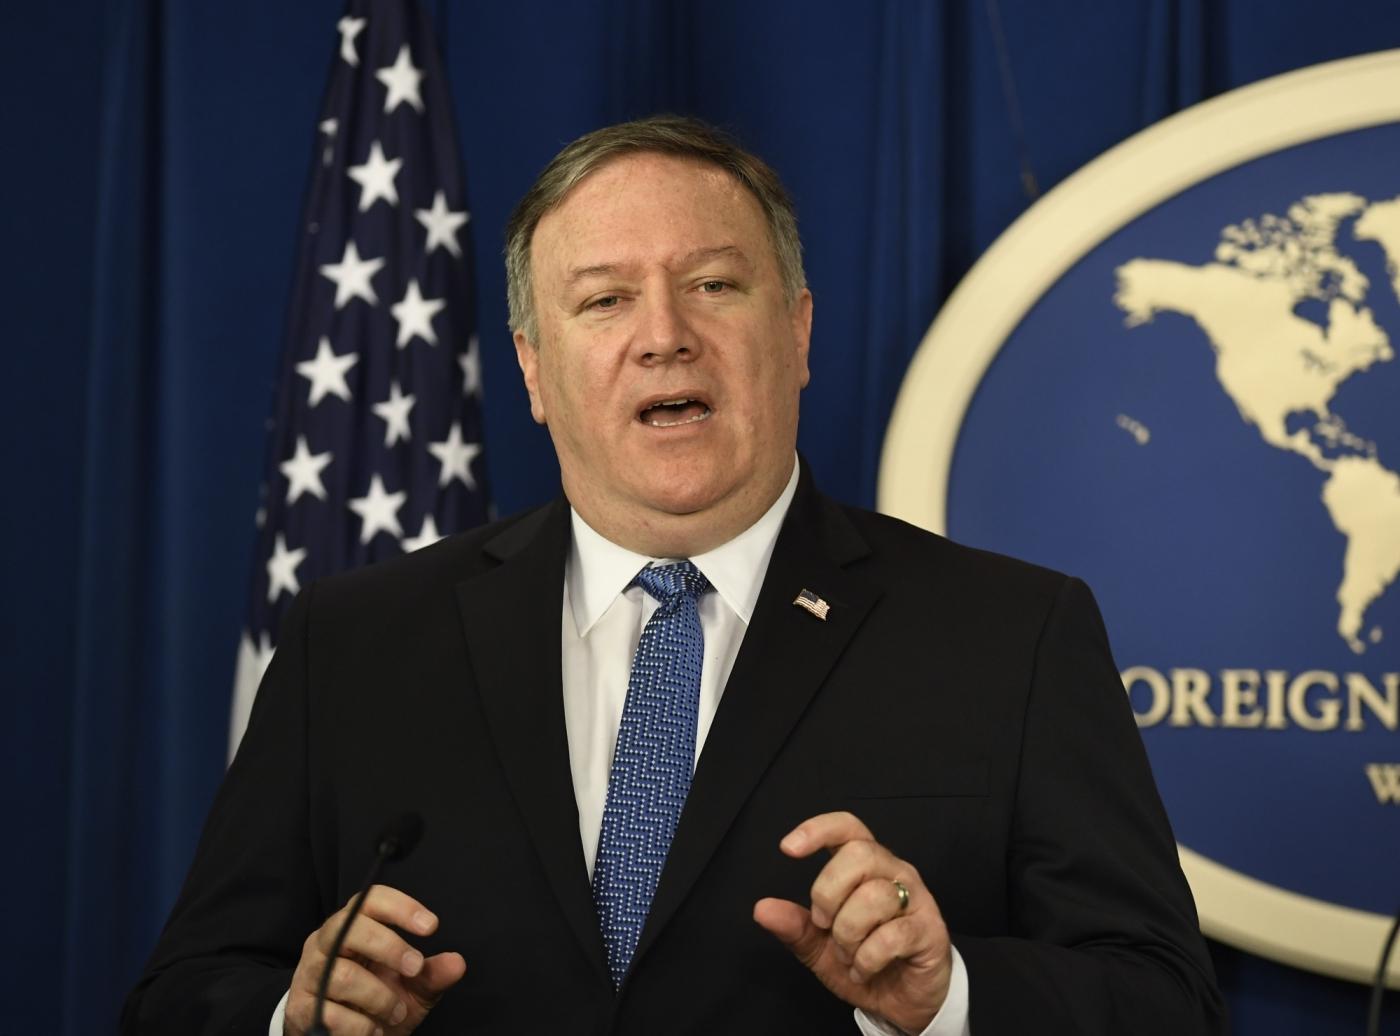 WASHINGTON D.C., Nov. 6, 2018 (Xinhua) -- U.S. Secretary of State Mike Pompeo speaks during a press conference in Washington D.C. Nov. 5, 2018. The U.S. reimposed sanctions against Iran's oil exports, which had been lifted under the landmark 2015 nuclear agreement to curtail Iran's nuclear program. However, Washington granted temporary waivers to allow eight major buyers to keep importing Iranian oil for some time. (Xinhua/Liu Jie/IANS) by .